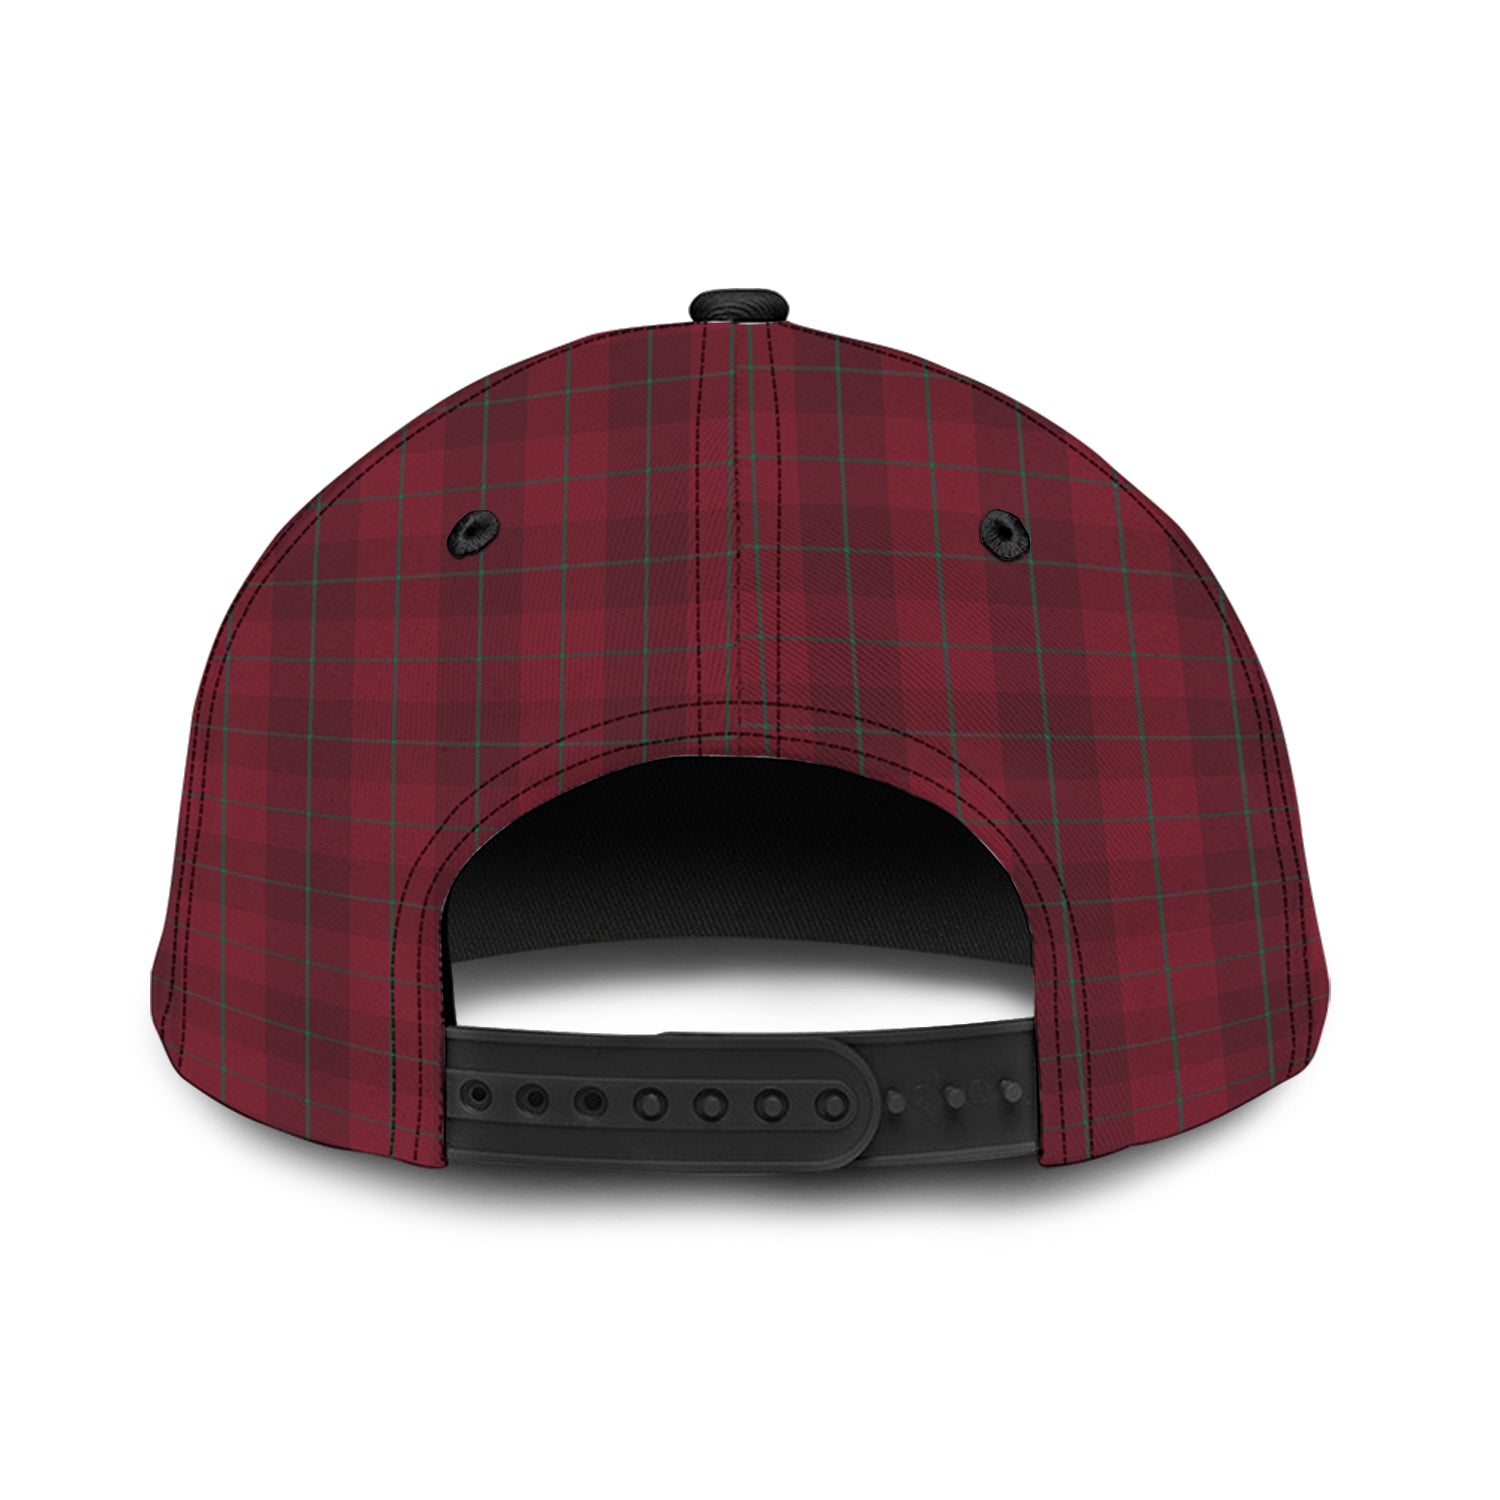 stirling-of-keir-tartan-classic-cap-with-family-crest